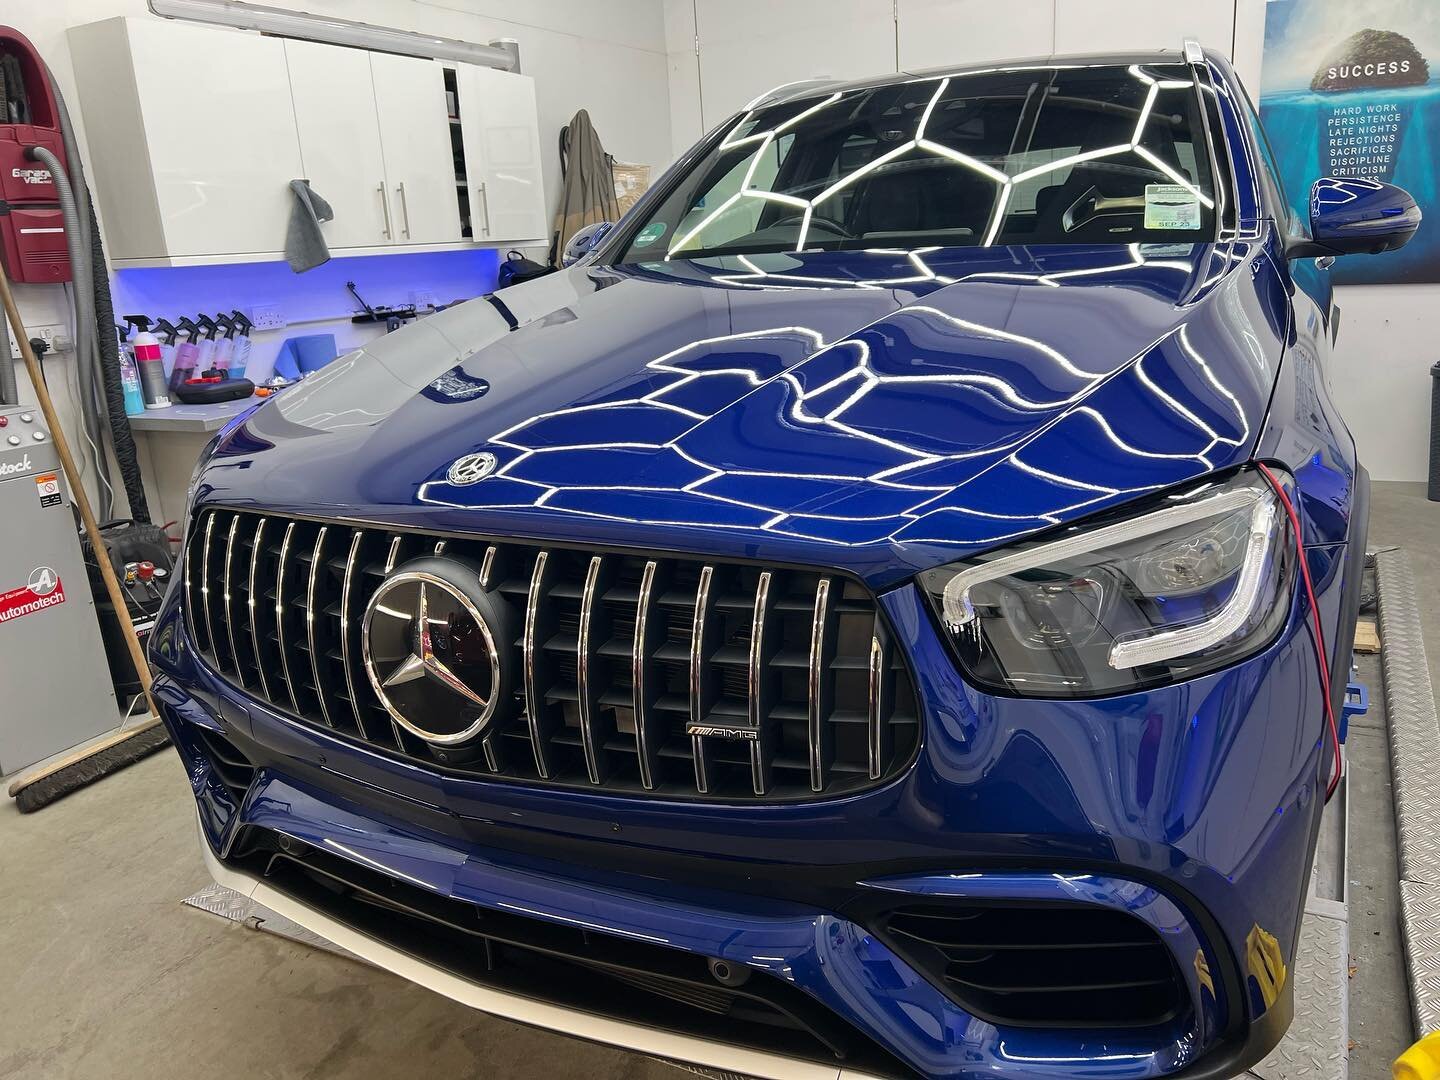 AMG - &lsquo;Blue Thunder&rsquo; - we put this insane spec GLC 63S 4matic + through the full decontamination, paint correction, and ceramic protection package. The spec on this car is amazing! It like absolutely amazing now wearing @gyeon_official in